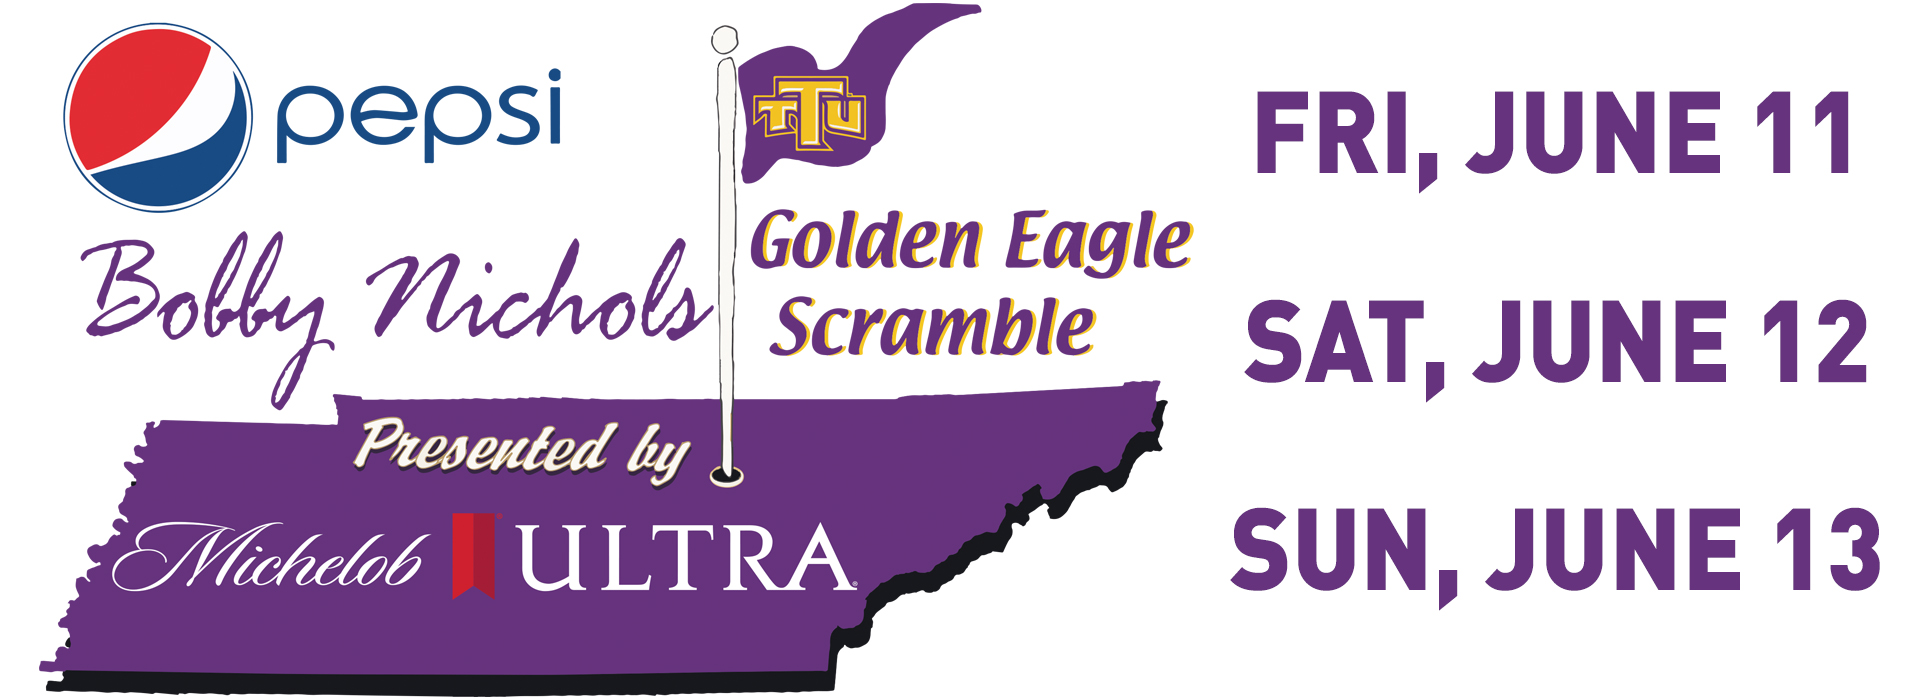 Save the date – Pepsi Golden Eagle Scramble presented by Michelob Ultra set for June 11-13